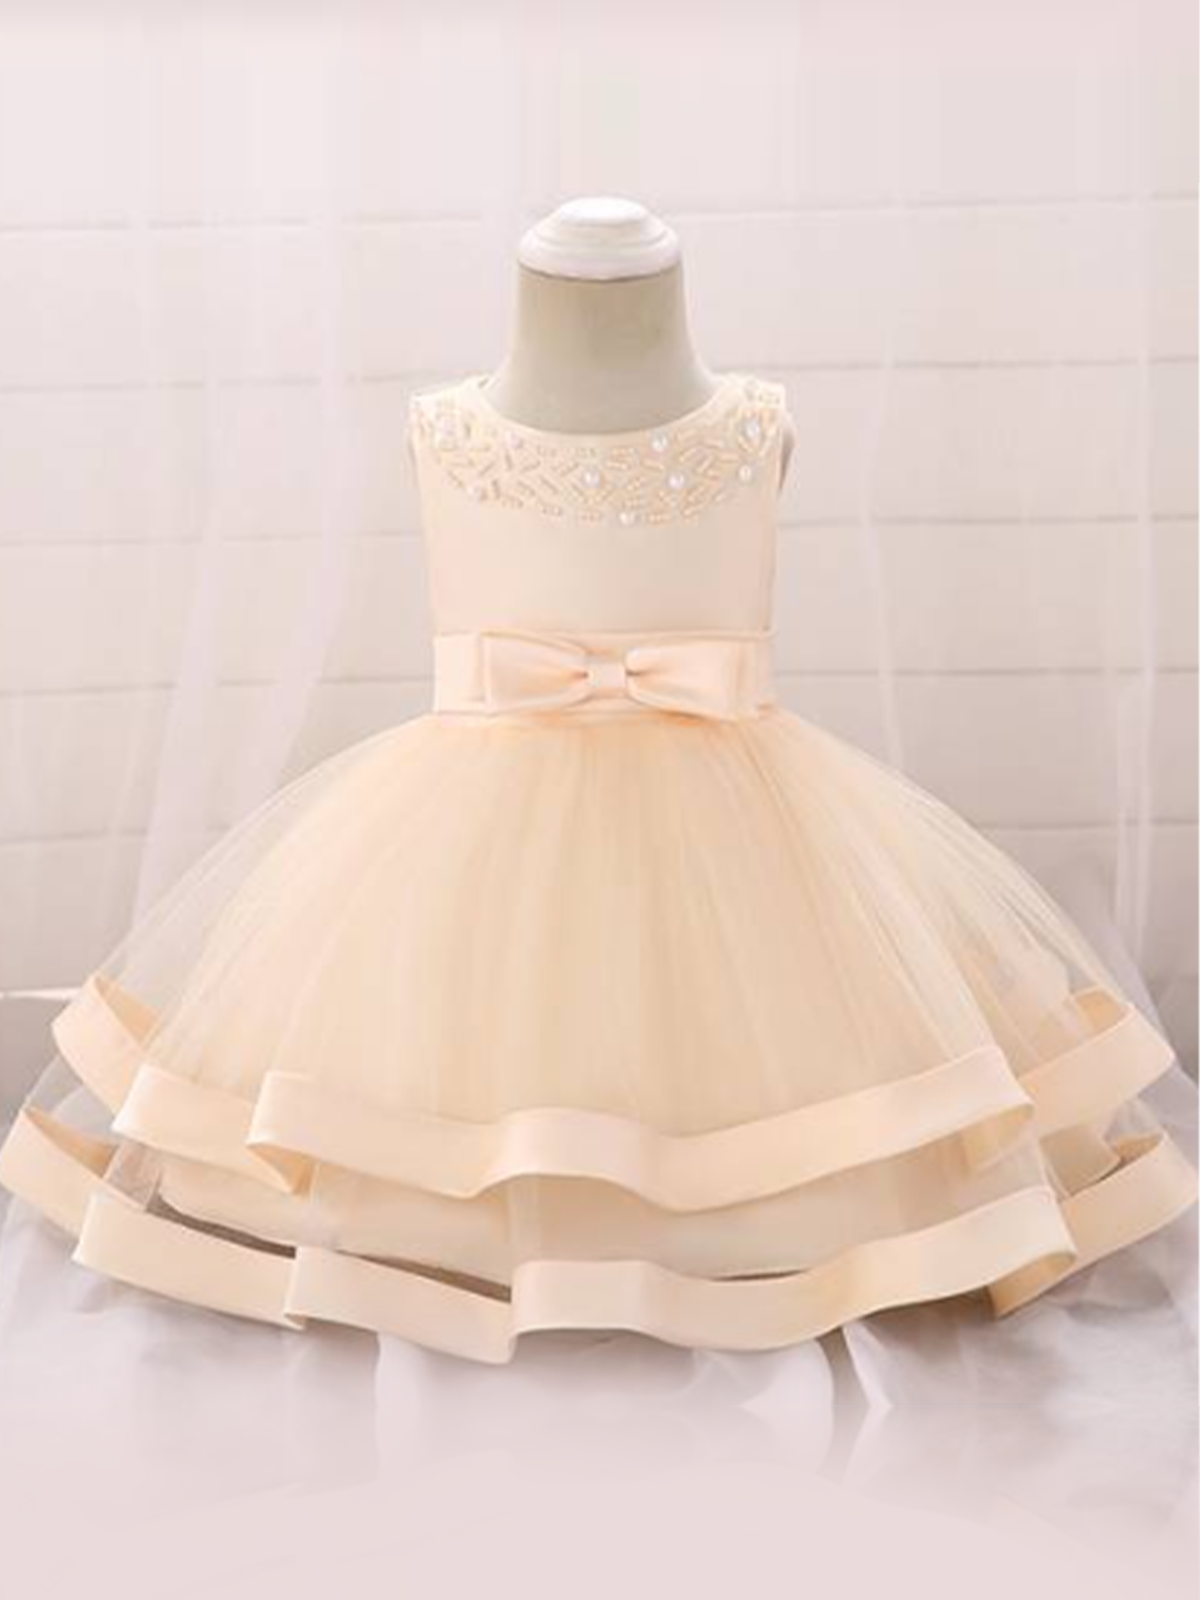 Baby dress features beautiful beads on the bodice, voile with satin hem-creme